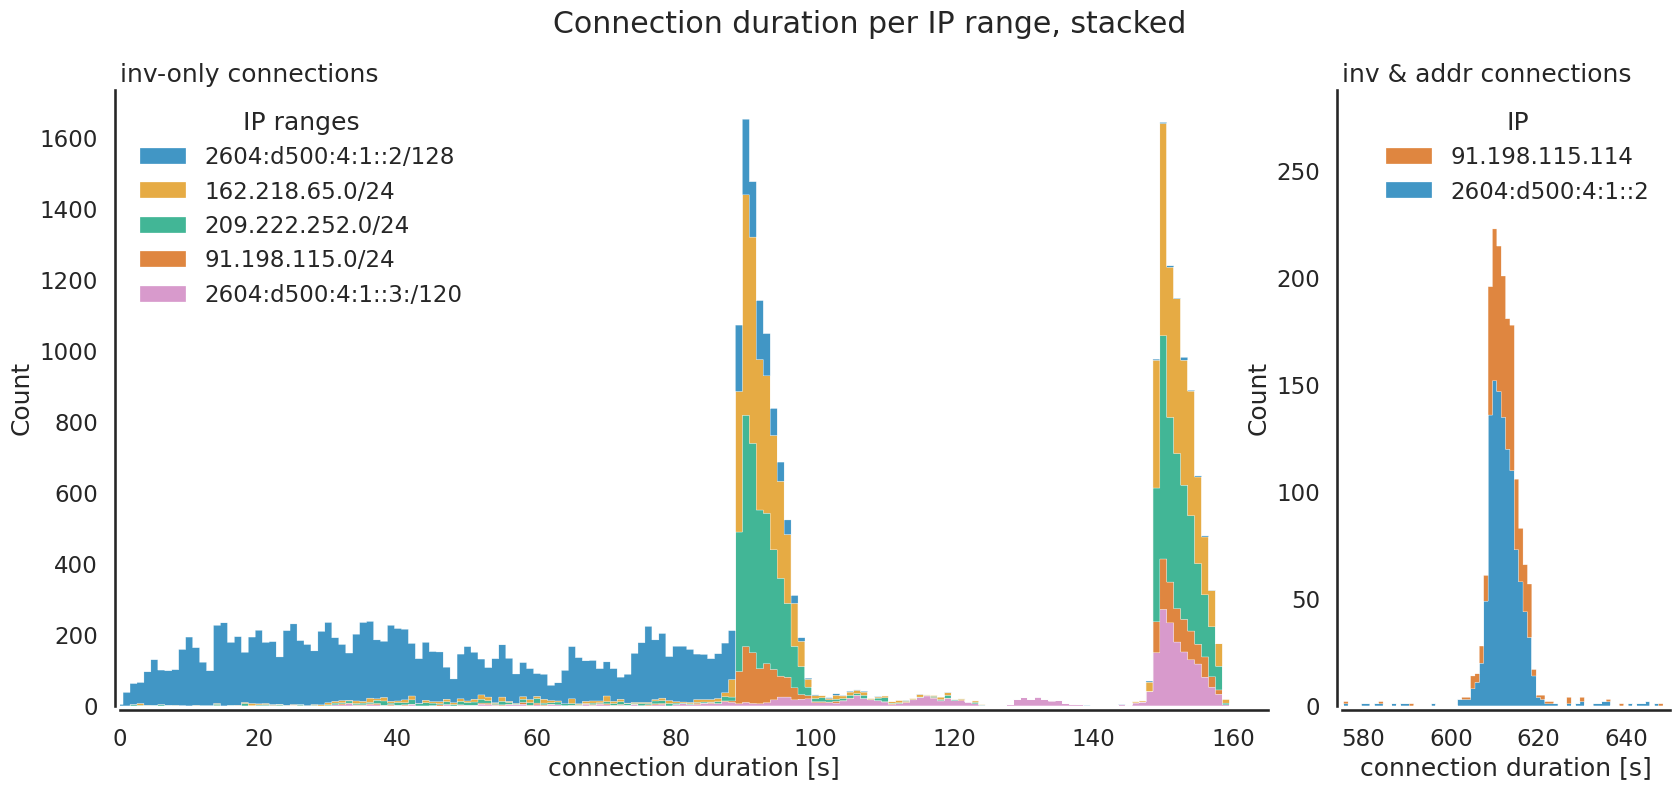 Connection duration per IP range, stacked